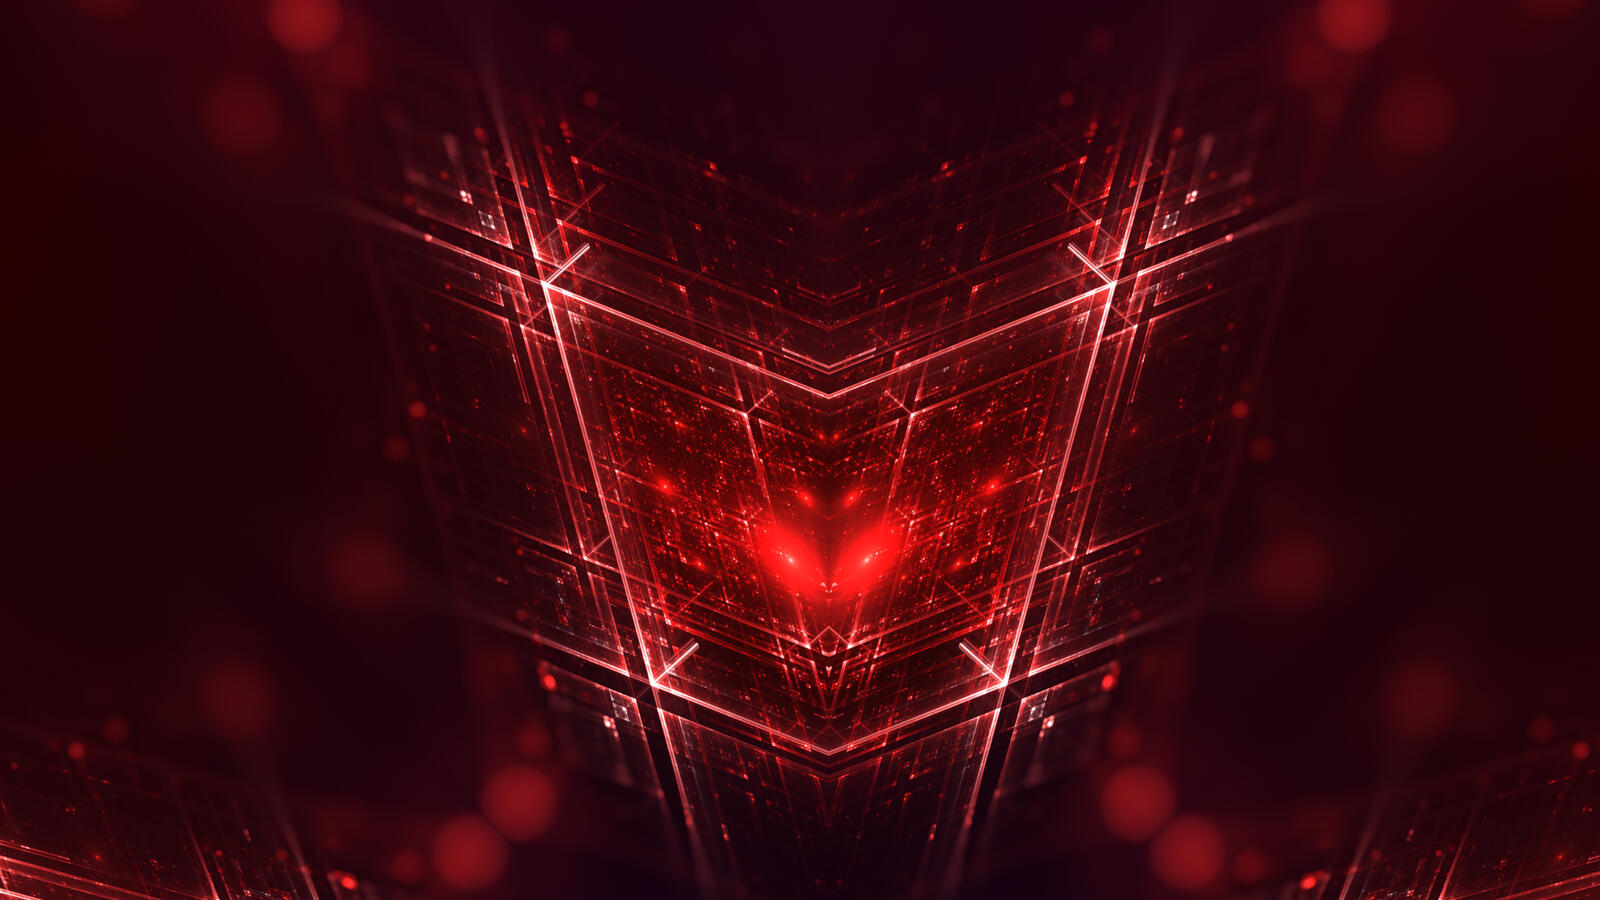 Wallpapers deviant art abstraction red on the desktop